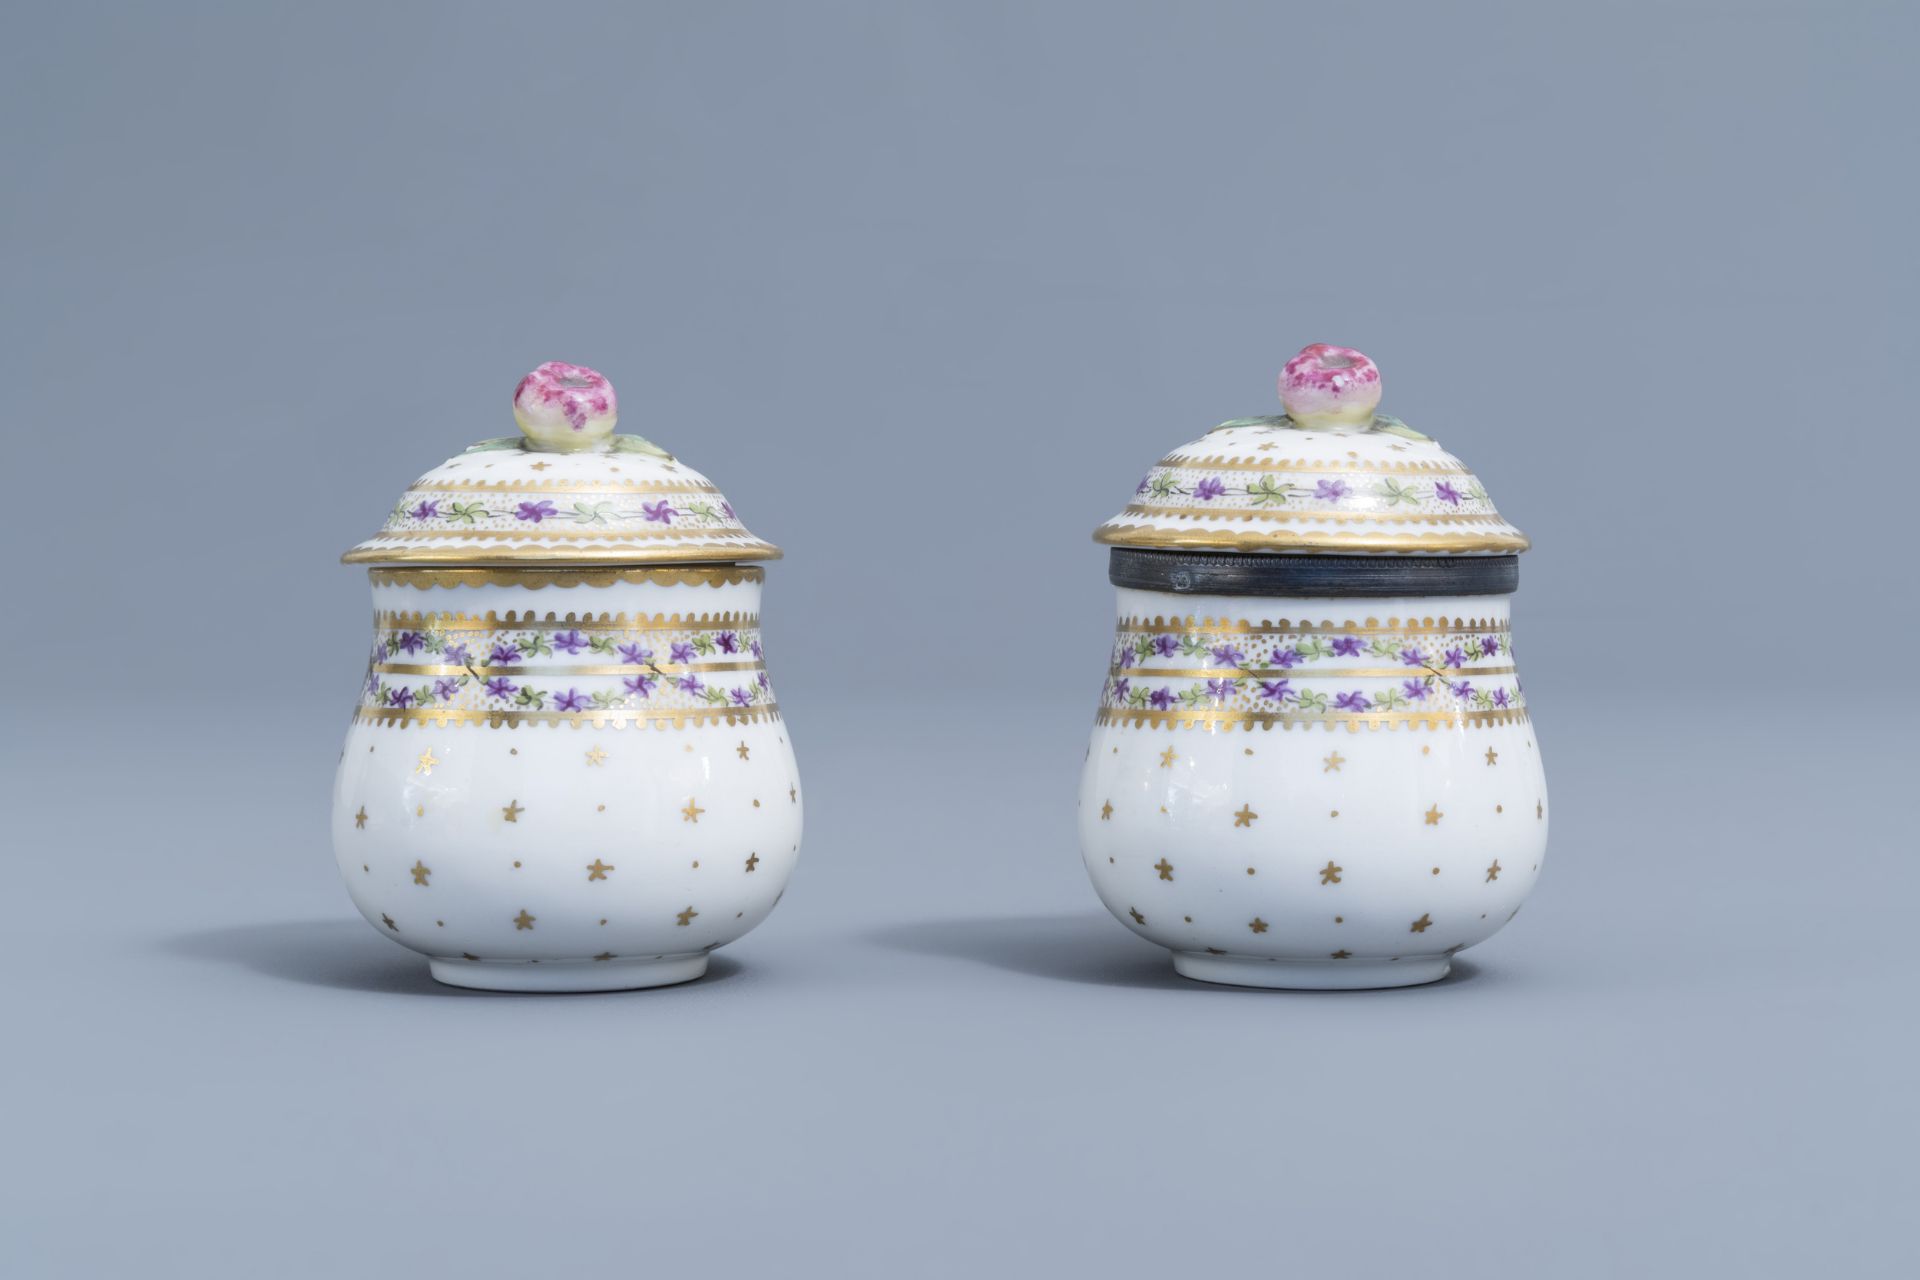 A pair of bue and white faience fine salts and five cream jars, Luxemburg and France, 18th/19th C. - Image 26 of 46